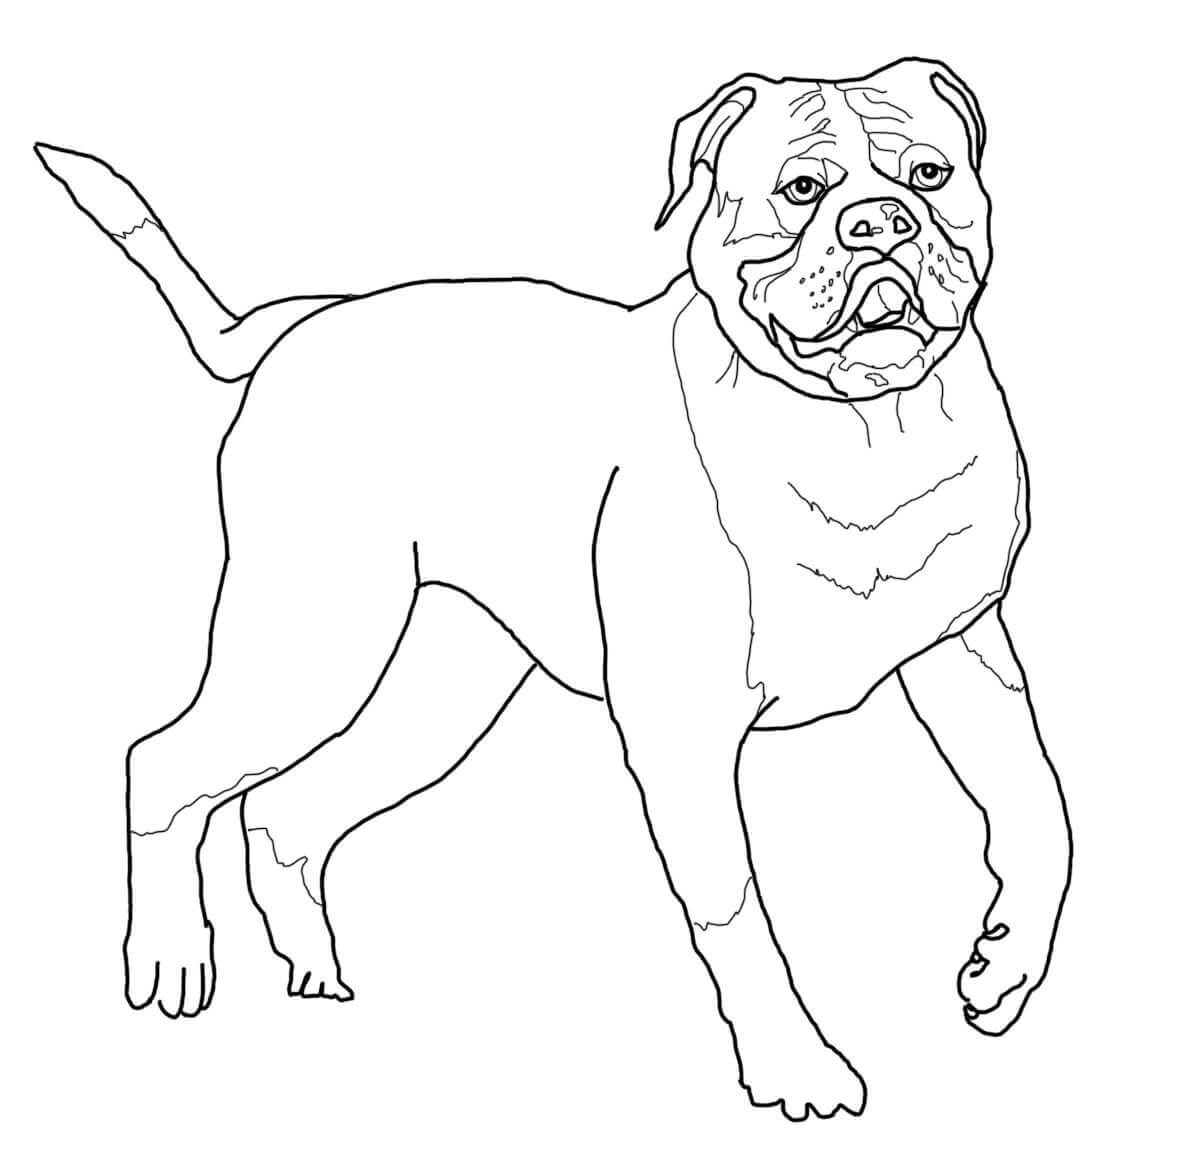 Dogs Coloring Pages Coloring Pages For Kids And Adults